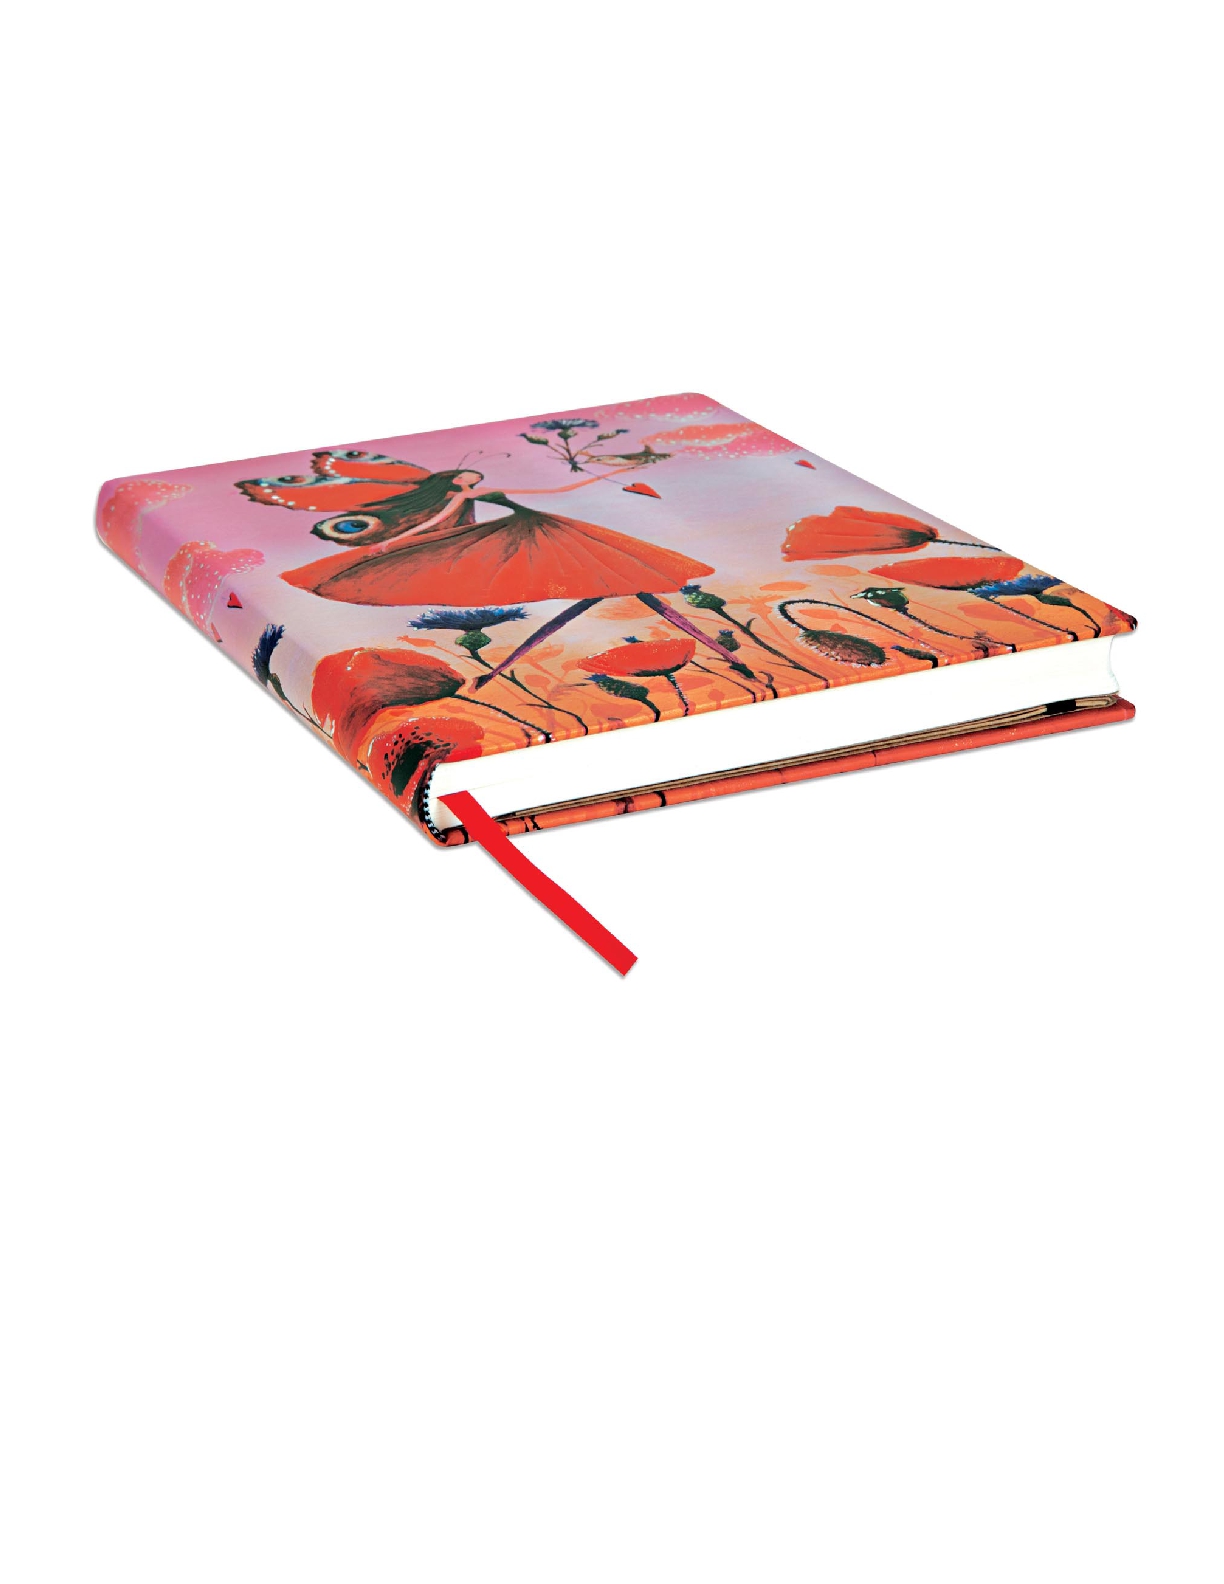 Poppy Field, Mila Marquis Collection, 5-Year Snapshot Journal, Ultra, Elastic Band Closure, 192 Pg, 120 GSM